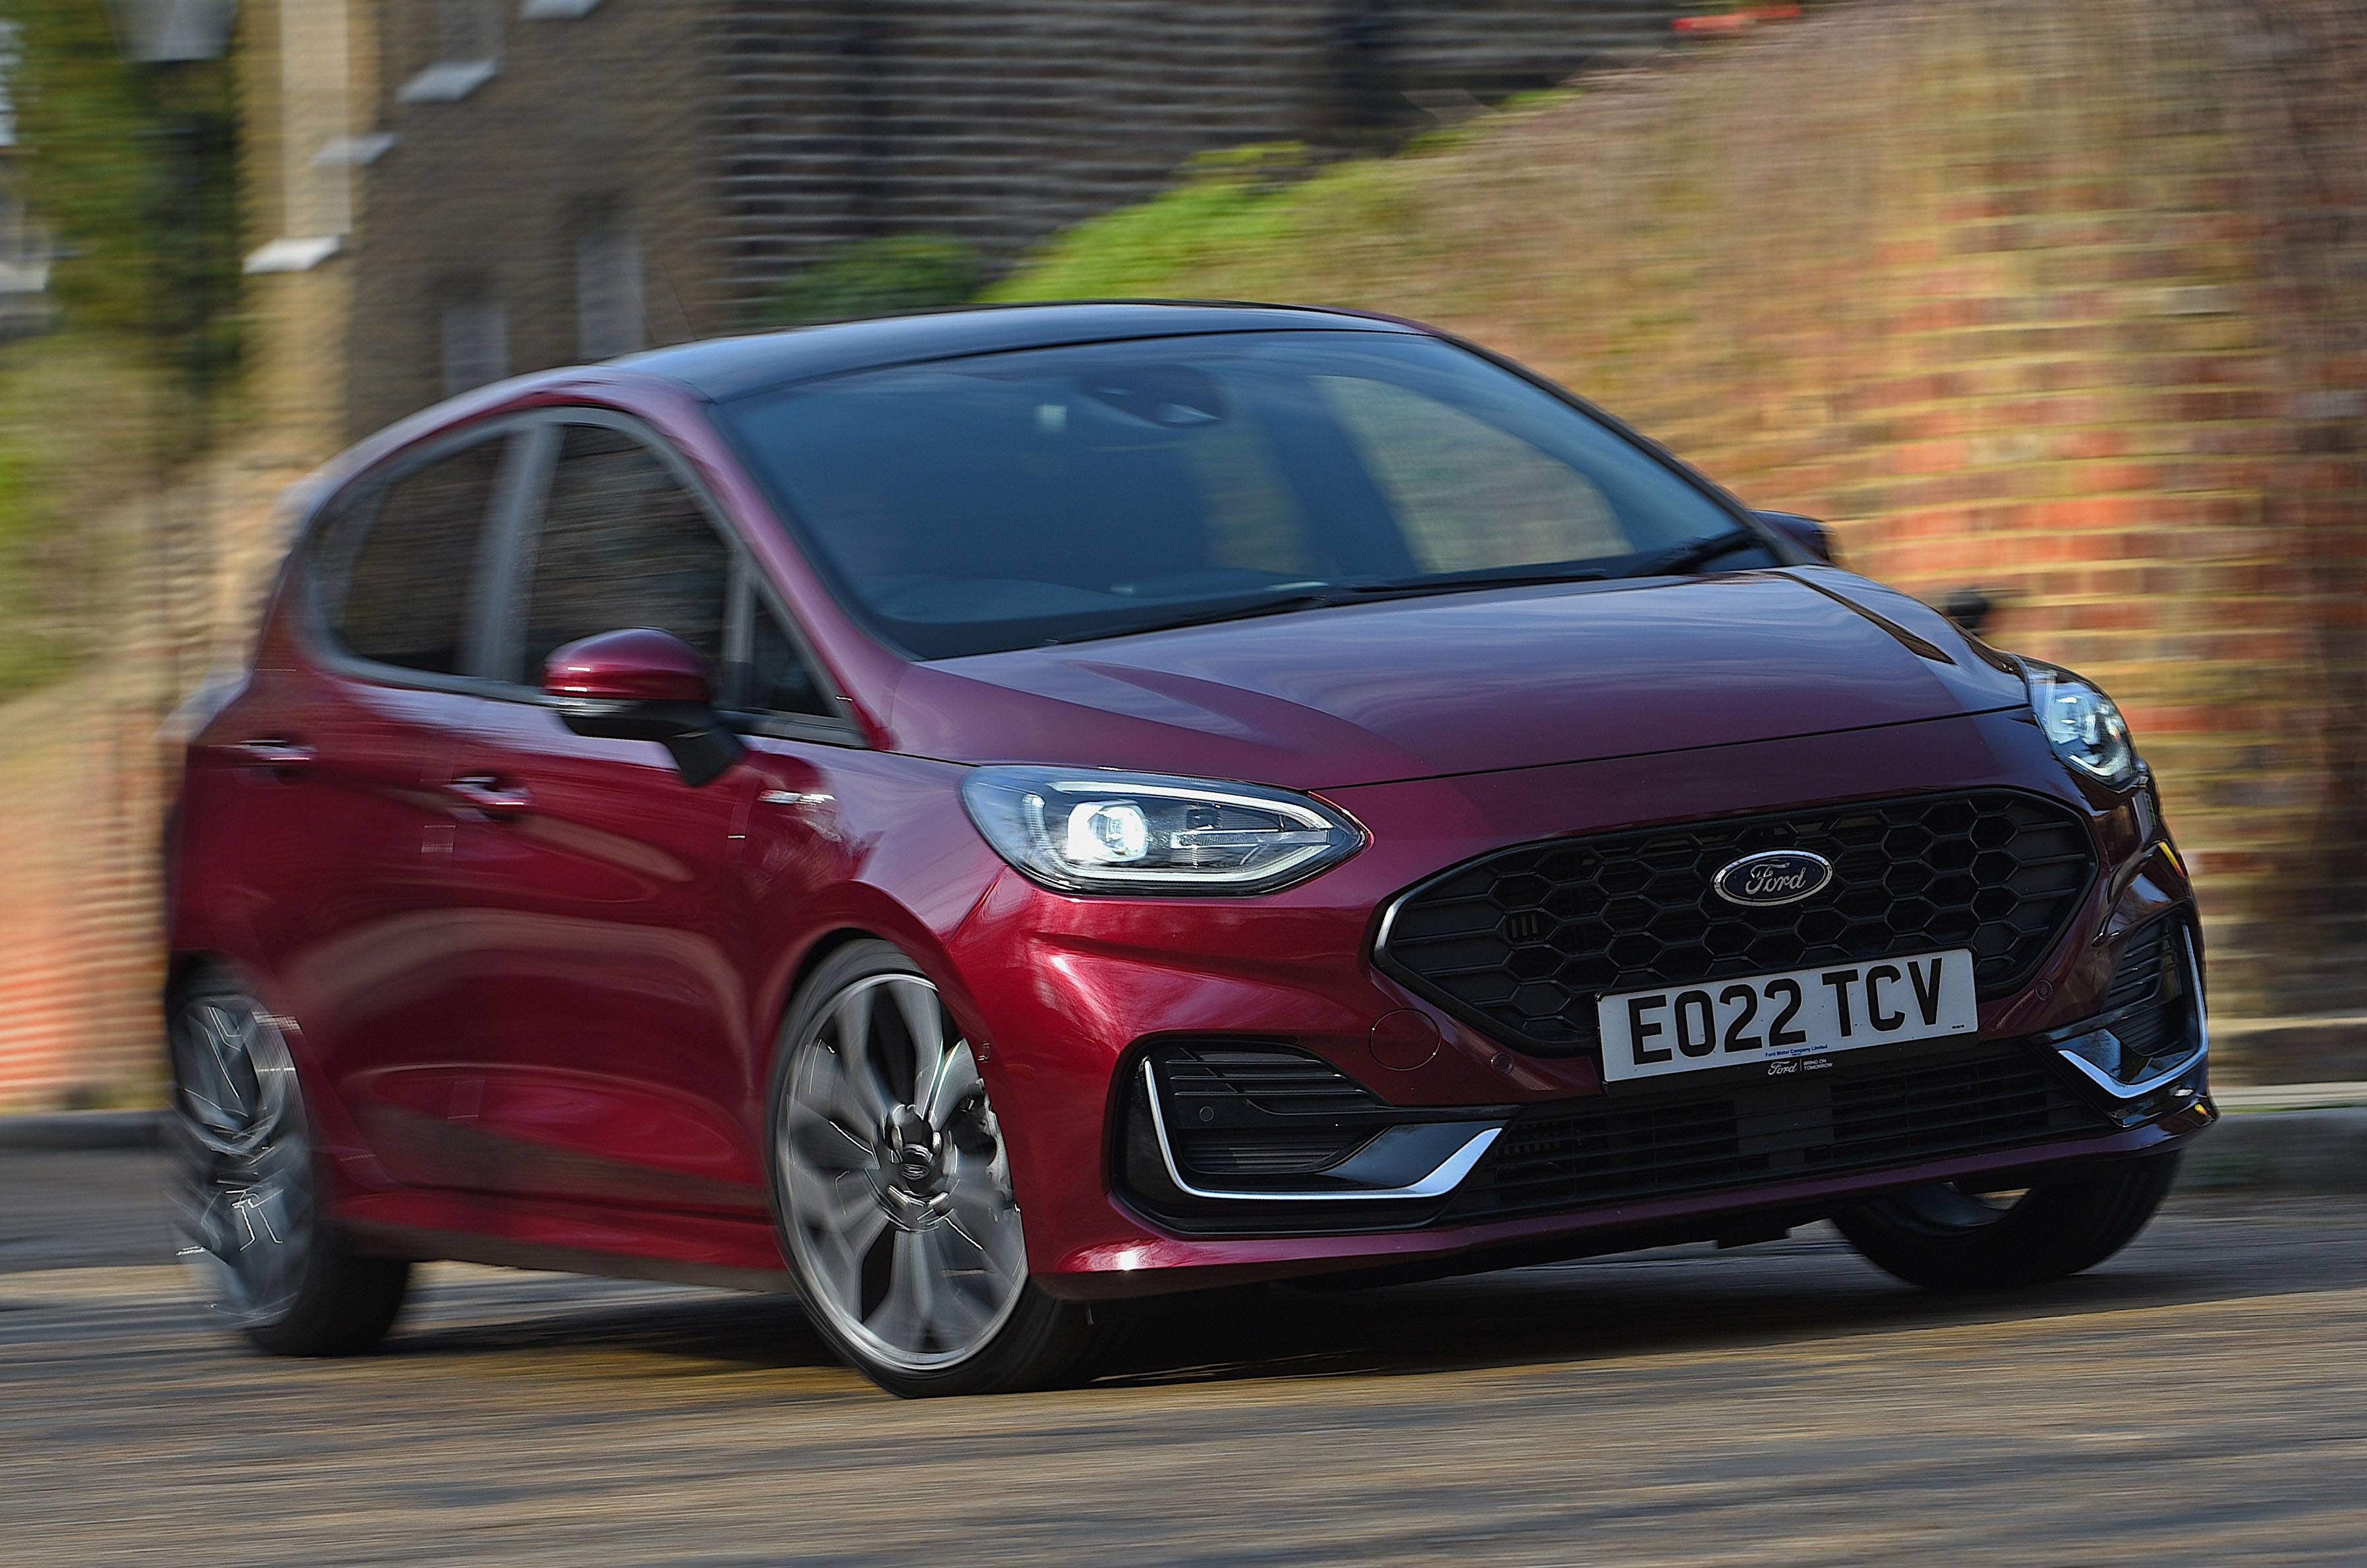 Ford Fiesta production ends after 47 years Autocar